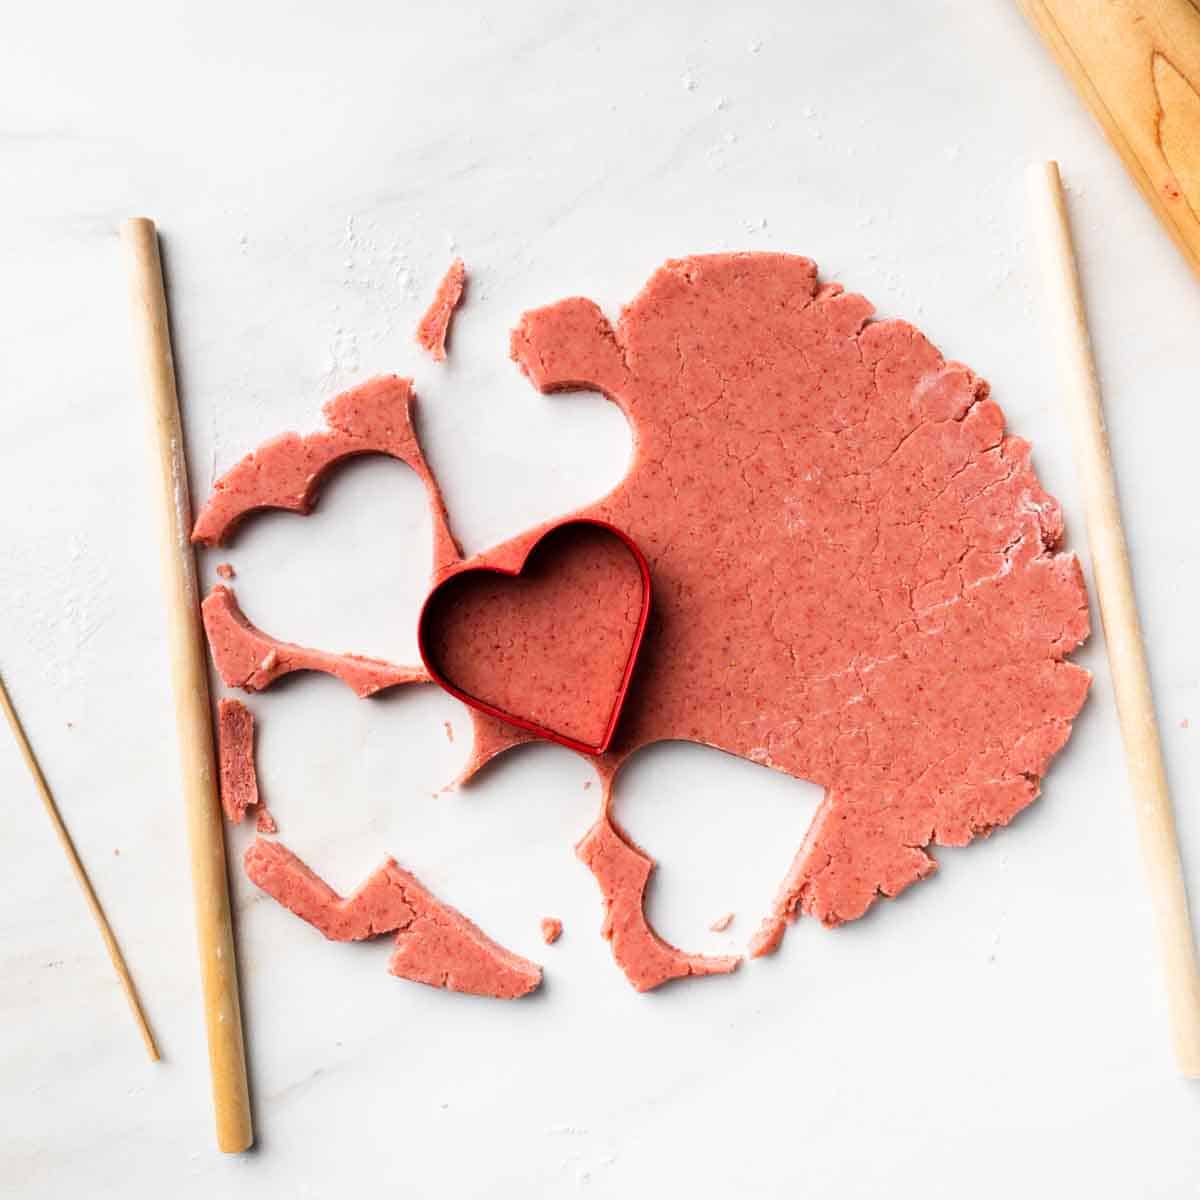 Rolled cookie dough with heart shaped cutouts and a red heart cookie cutter.